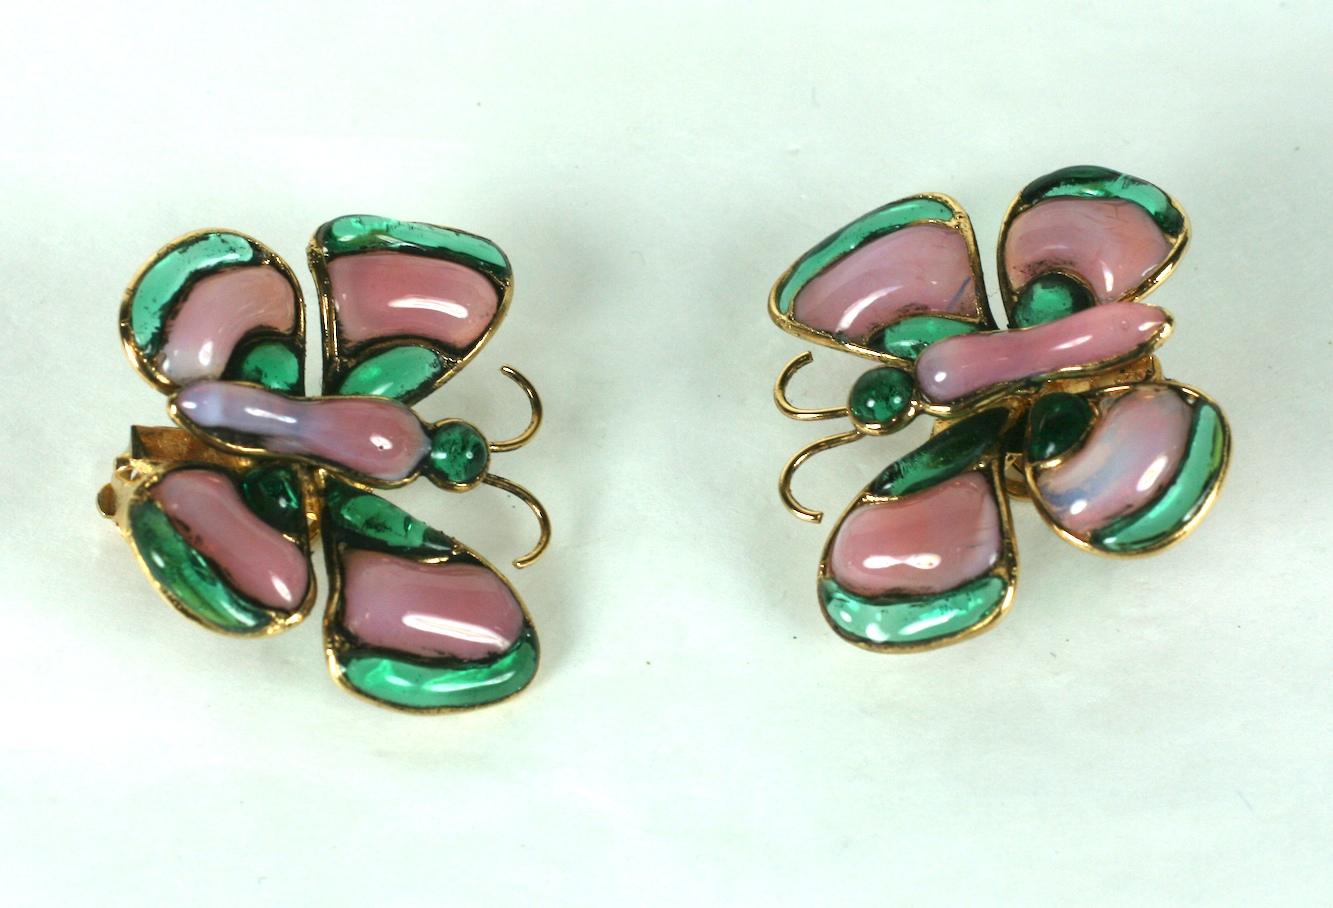 Chanel Maison Gripoix signature poured glass enamel butterfly ear clips of emerald and pale pink rose glass in hand made settings of gilt bronze metal. Clip back fittings. 
Excellent Condition, Signed.
Height 1.25